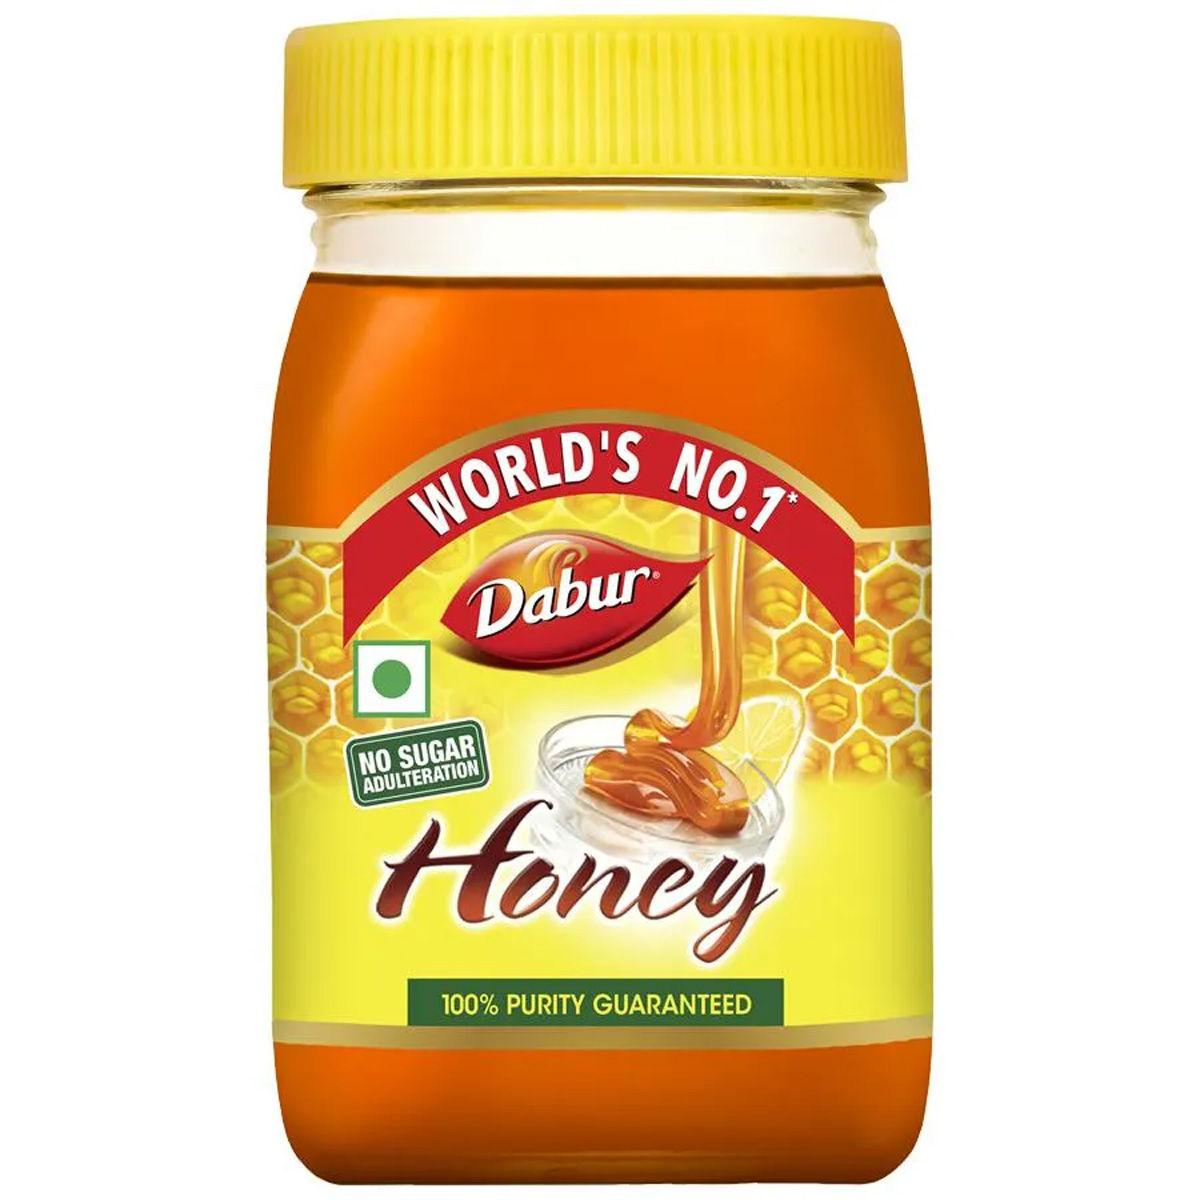 Dabur Honey, 250 gm Price, Uses, Side Effects, Composition ...